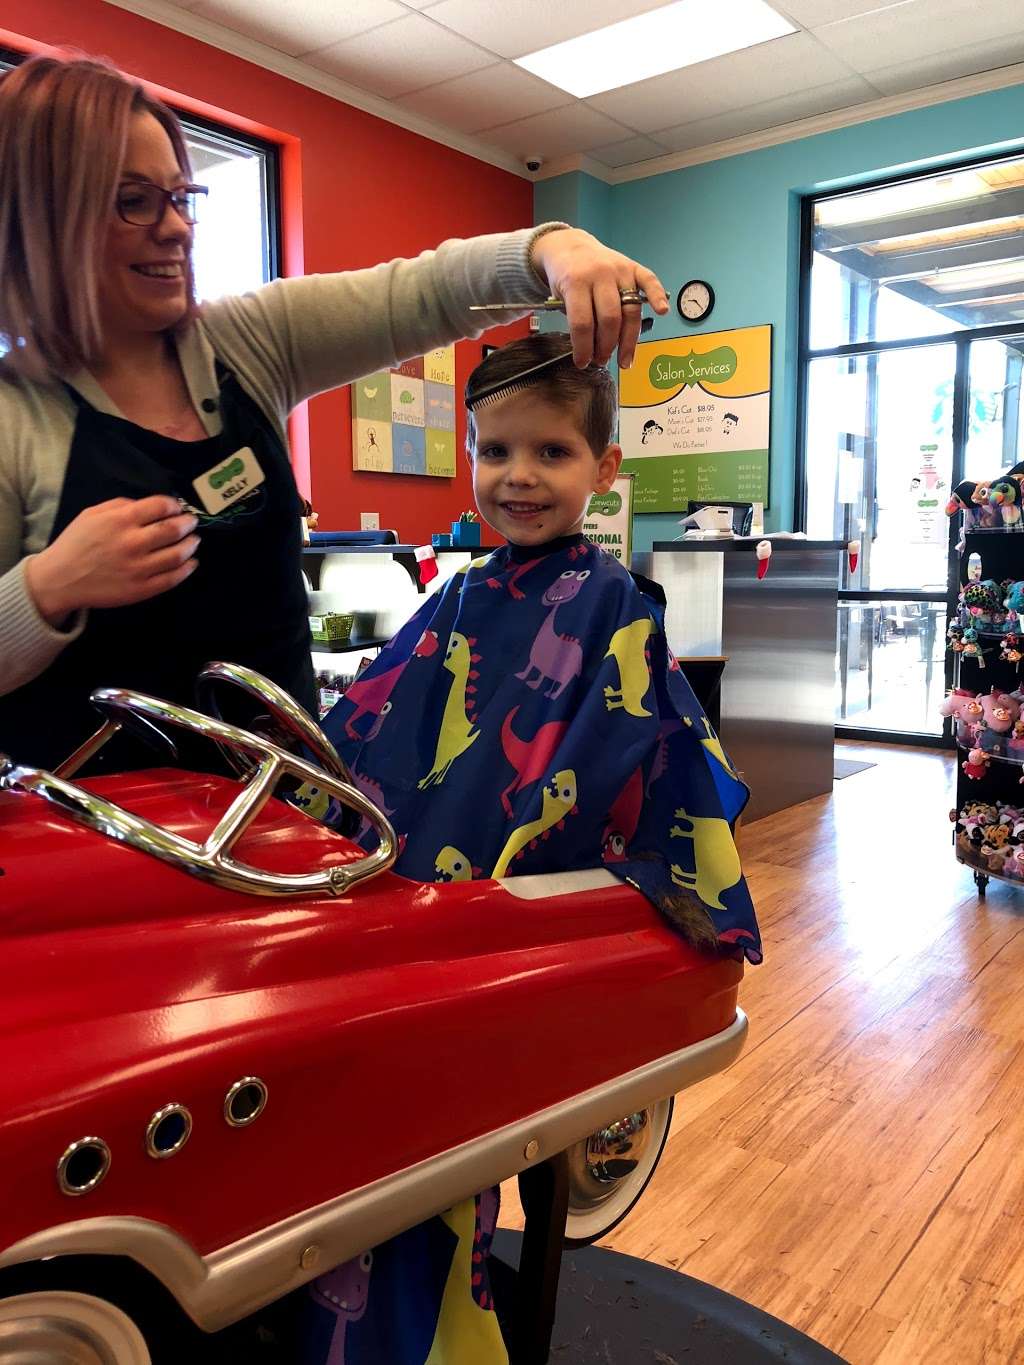 Pigtails & Crewcuts: Haircuts for Kids - Fort Mill | 1343 Broadcloth Street Suite 102, Fort Mill, SC 29715 | Phone: (803) 547-8005